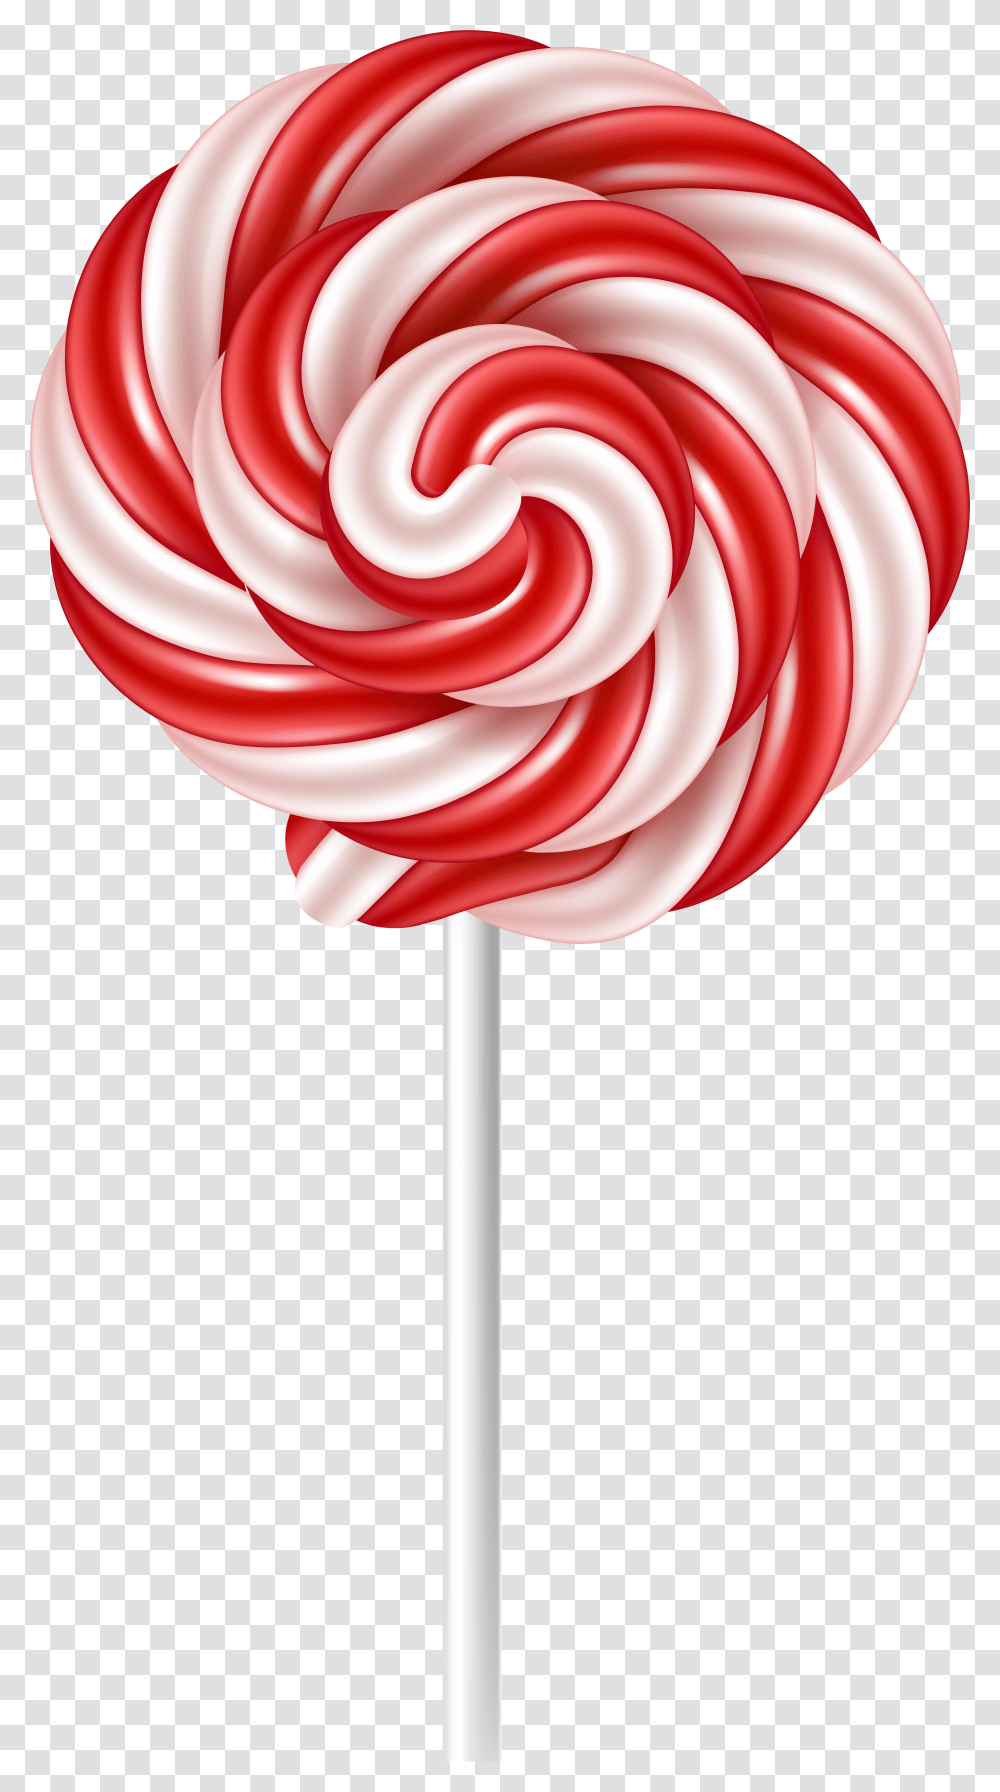 Clip Art Gallery Yopriceville Lollipops Candy Background Transparent Png